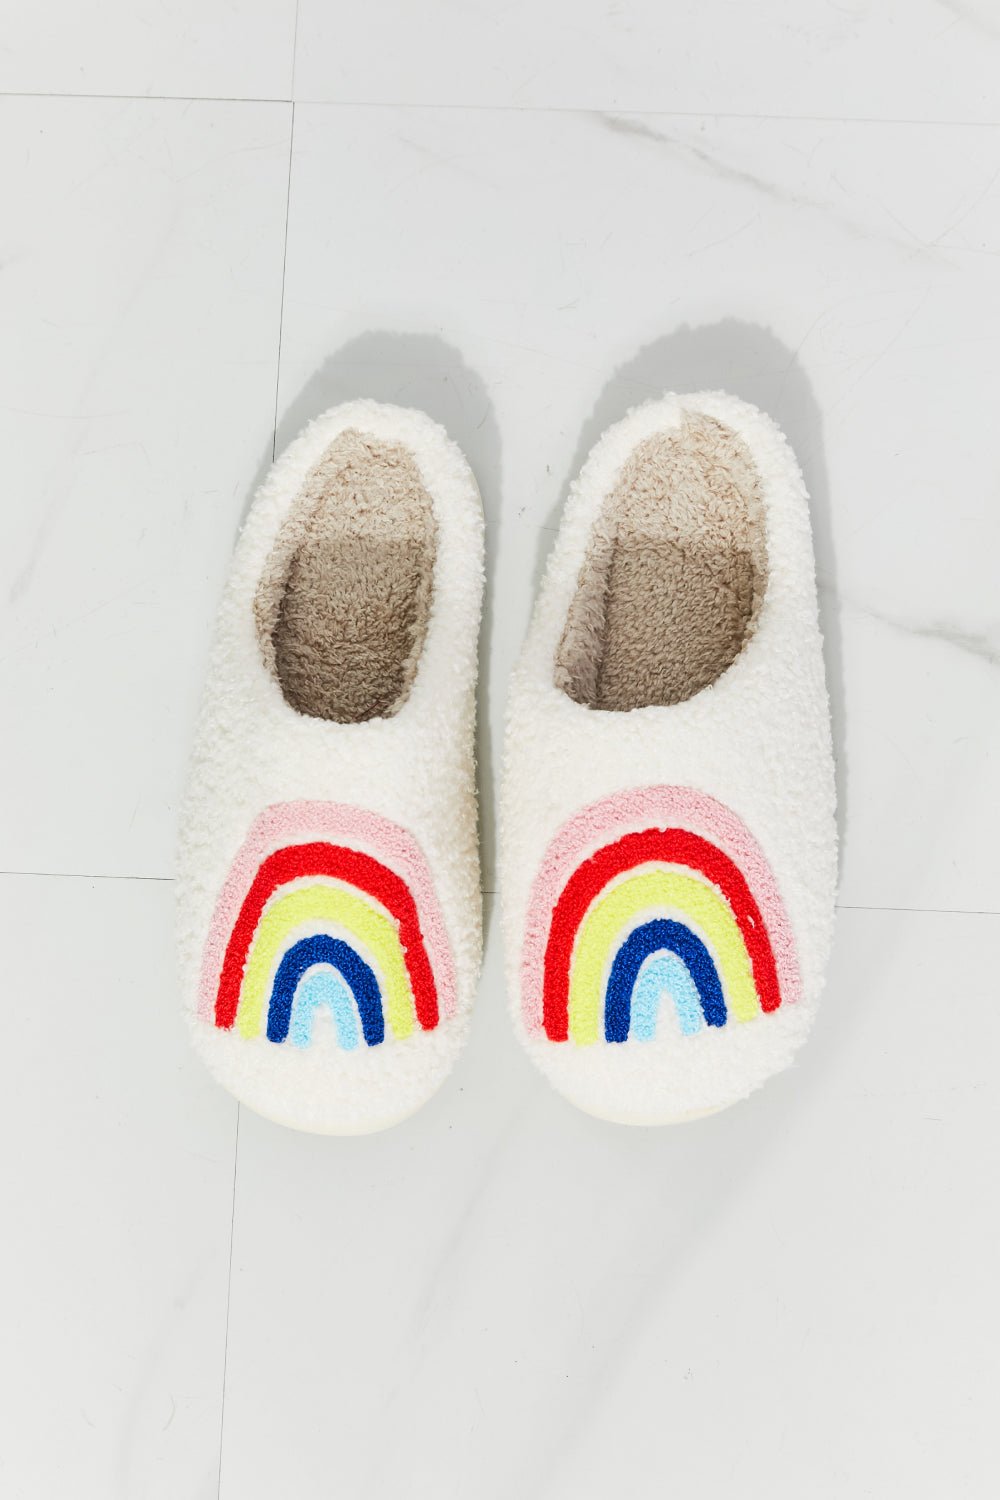 Rainbow Plush Cozy Slippers - The Kindness Cause